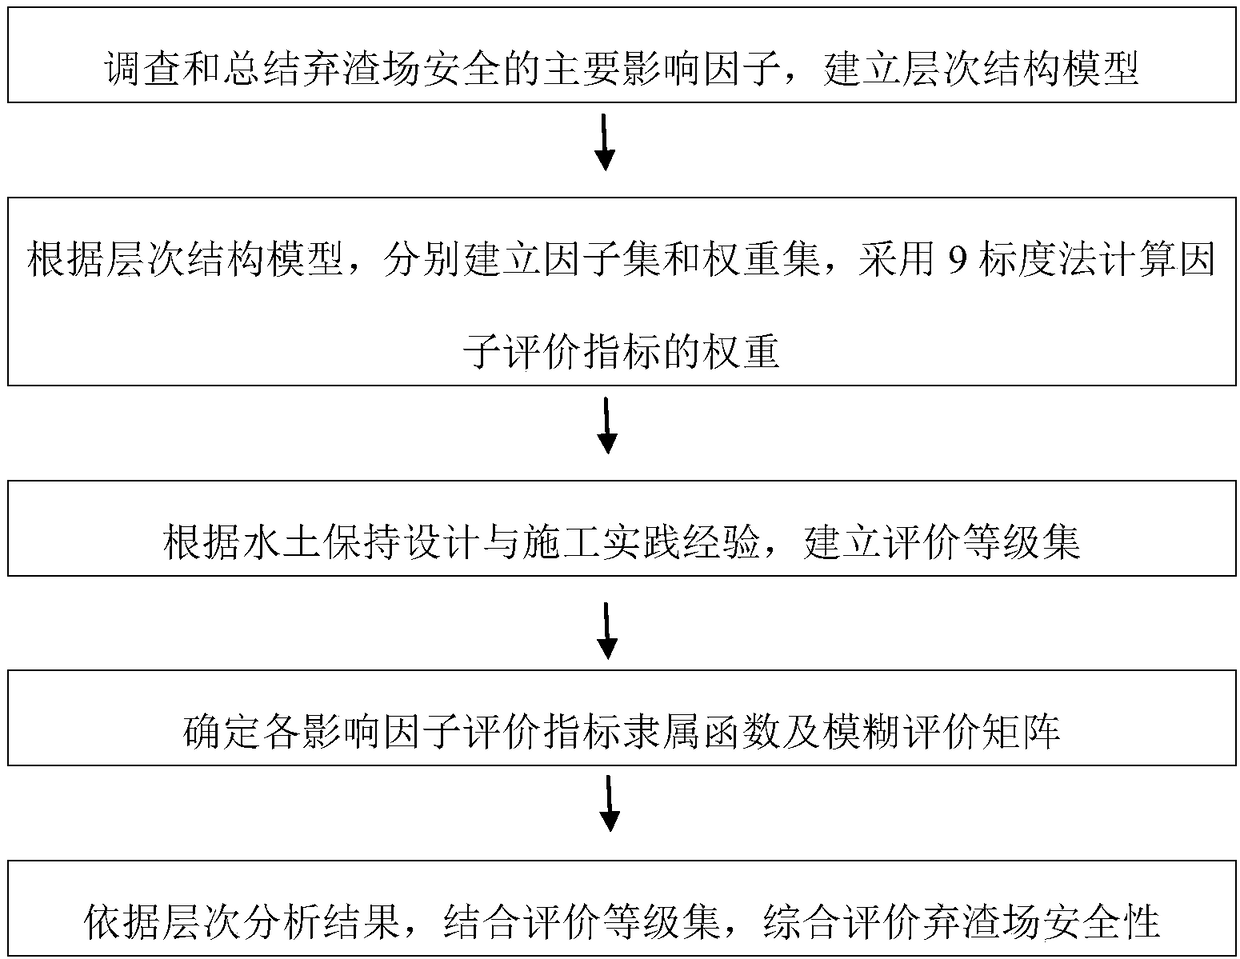 Safety evaluation method of waste dump based on fuzzy comprehensive analytic hierarchy process